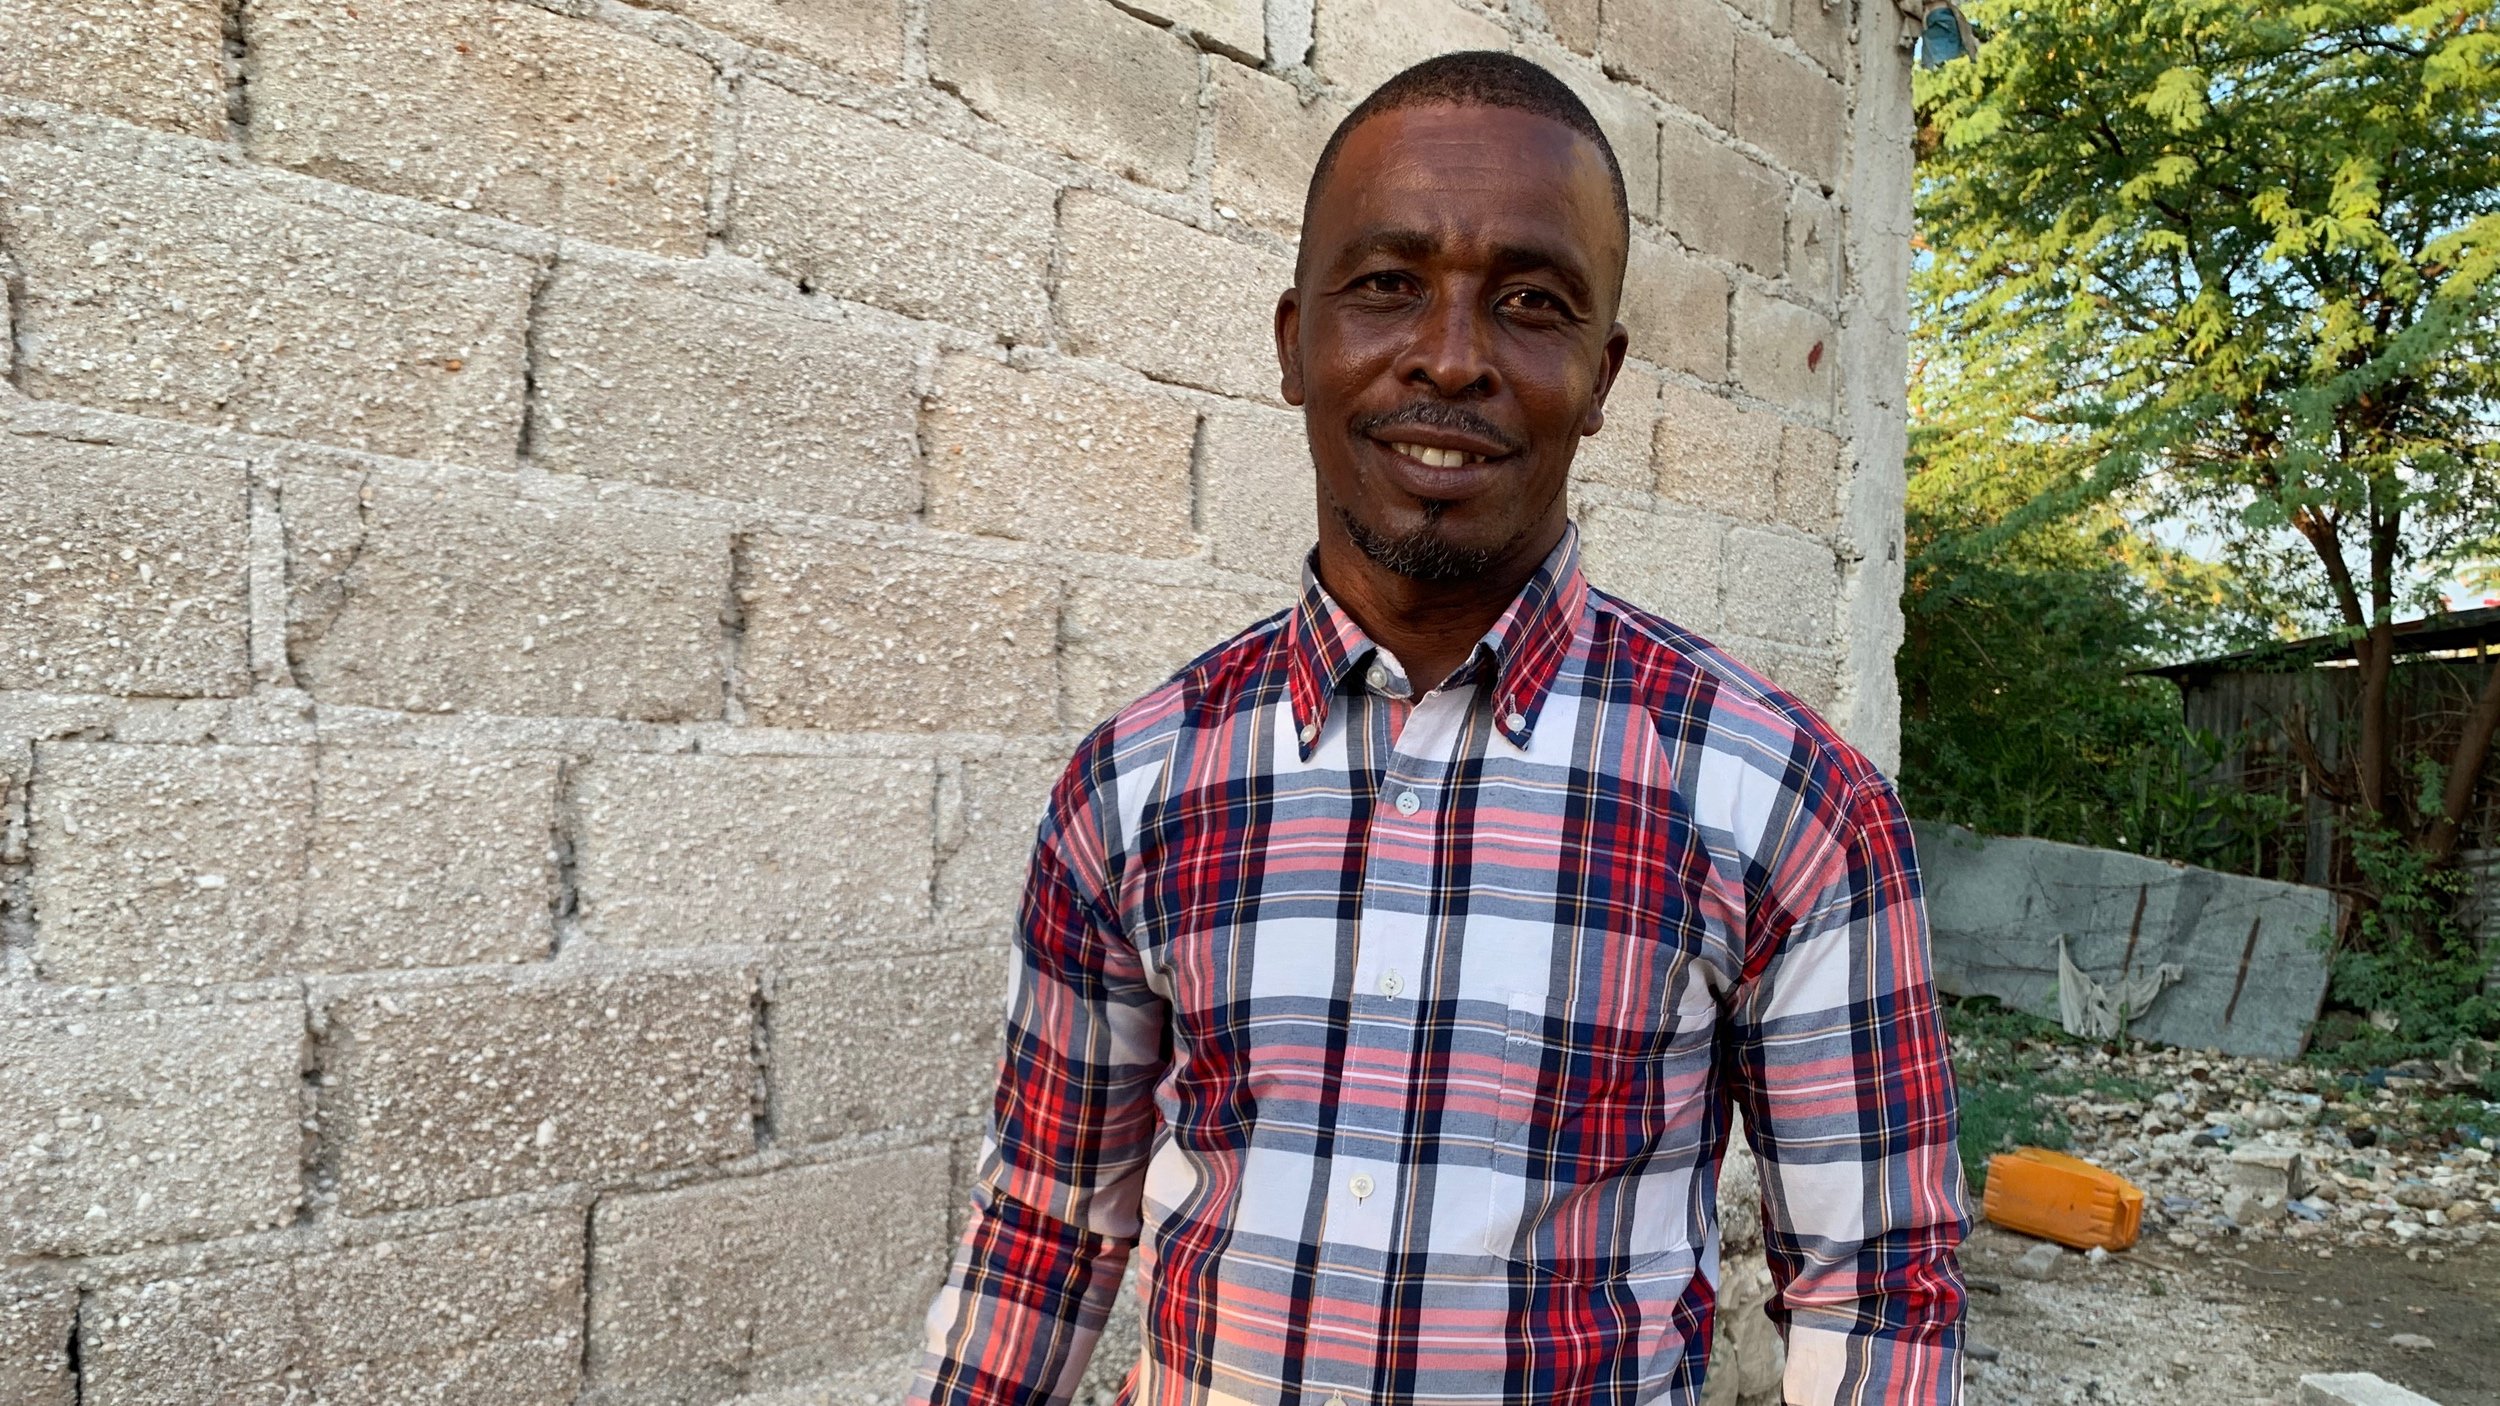  Giordani is an entrepreneur, husband and father. His wife, Anne Milouse, runs her own business, a small boutique selling essential items in her community. Some of you may recognize Giordani, as he is one of our Run Across Haiti Crew members and is w